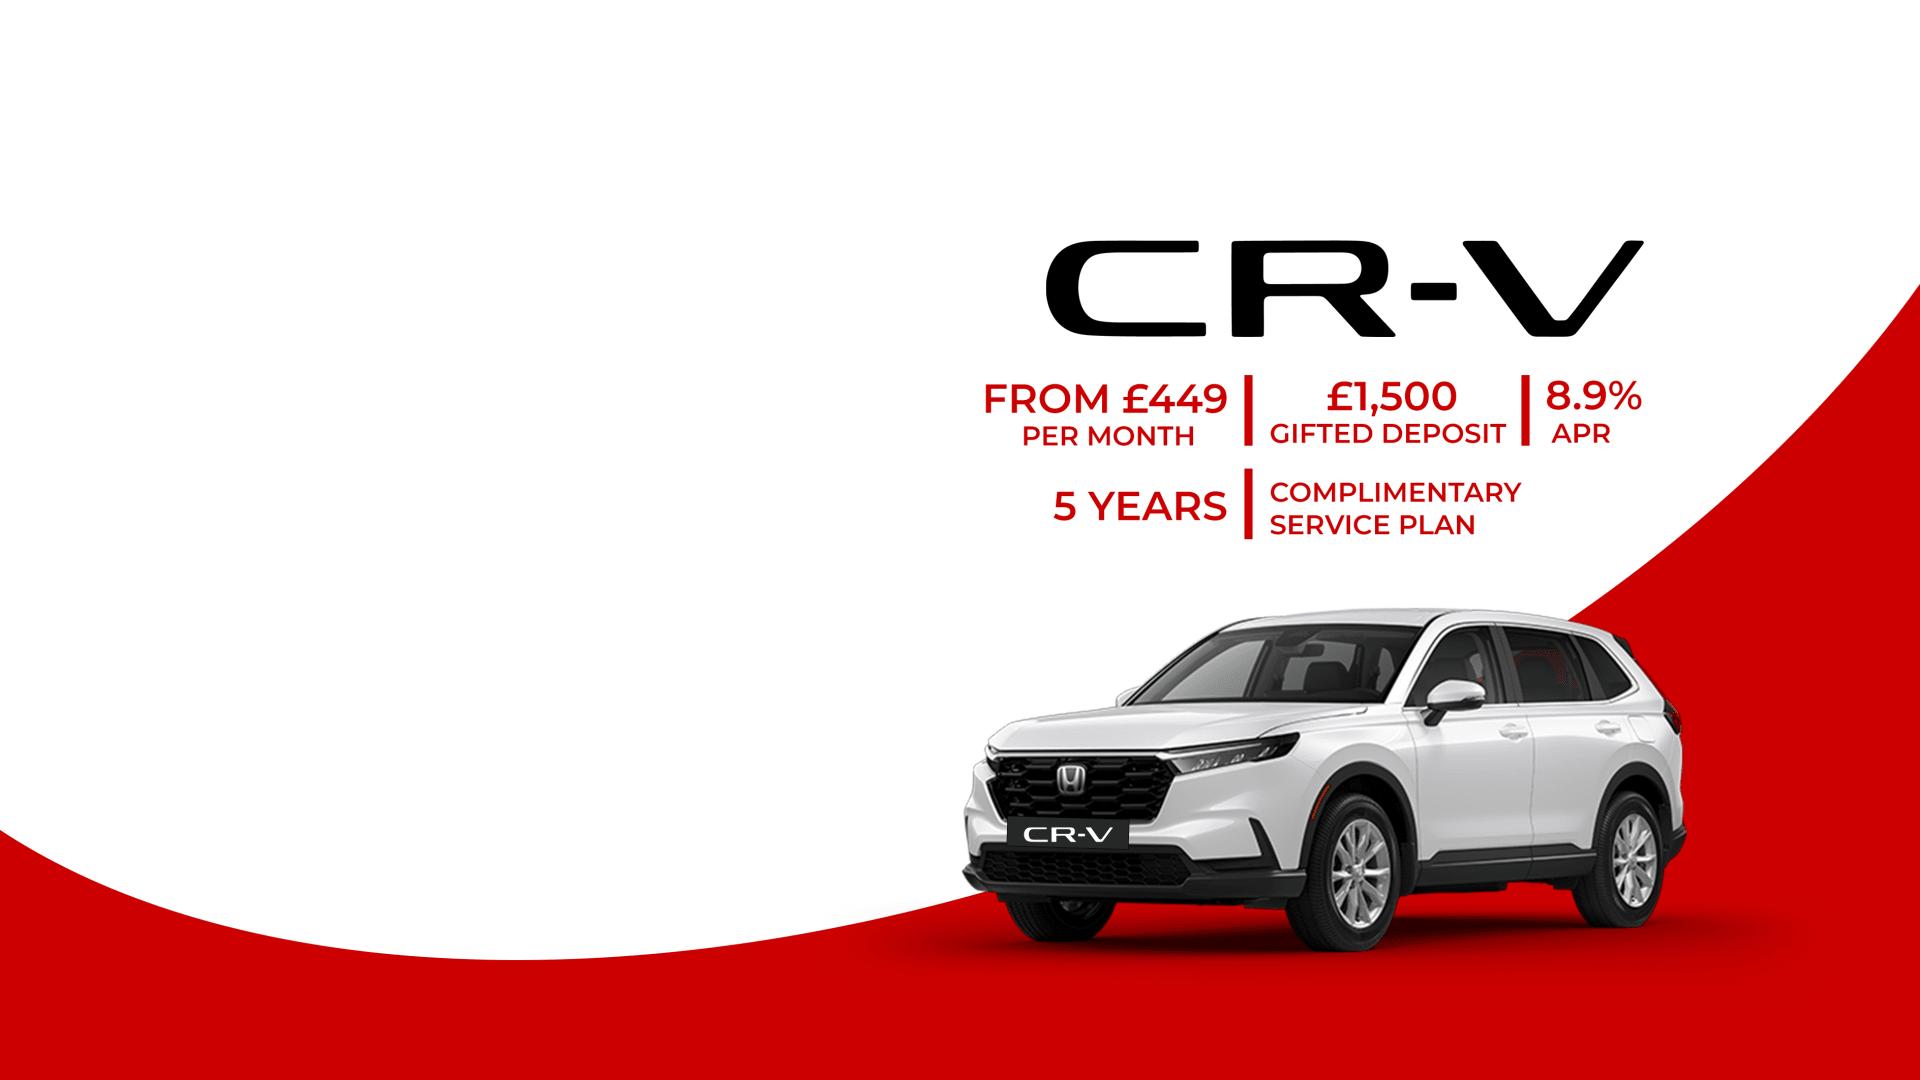 CR-V 5 Years Complimentary Service Plan